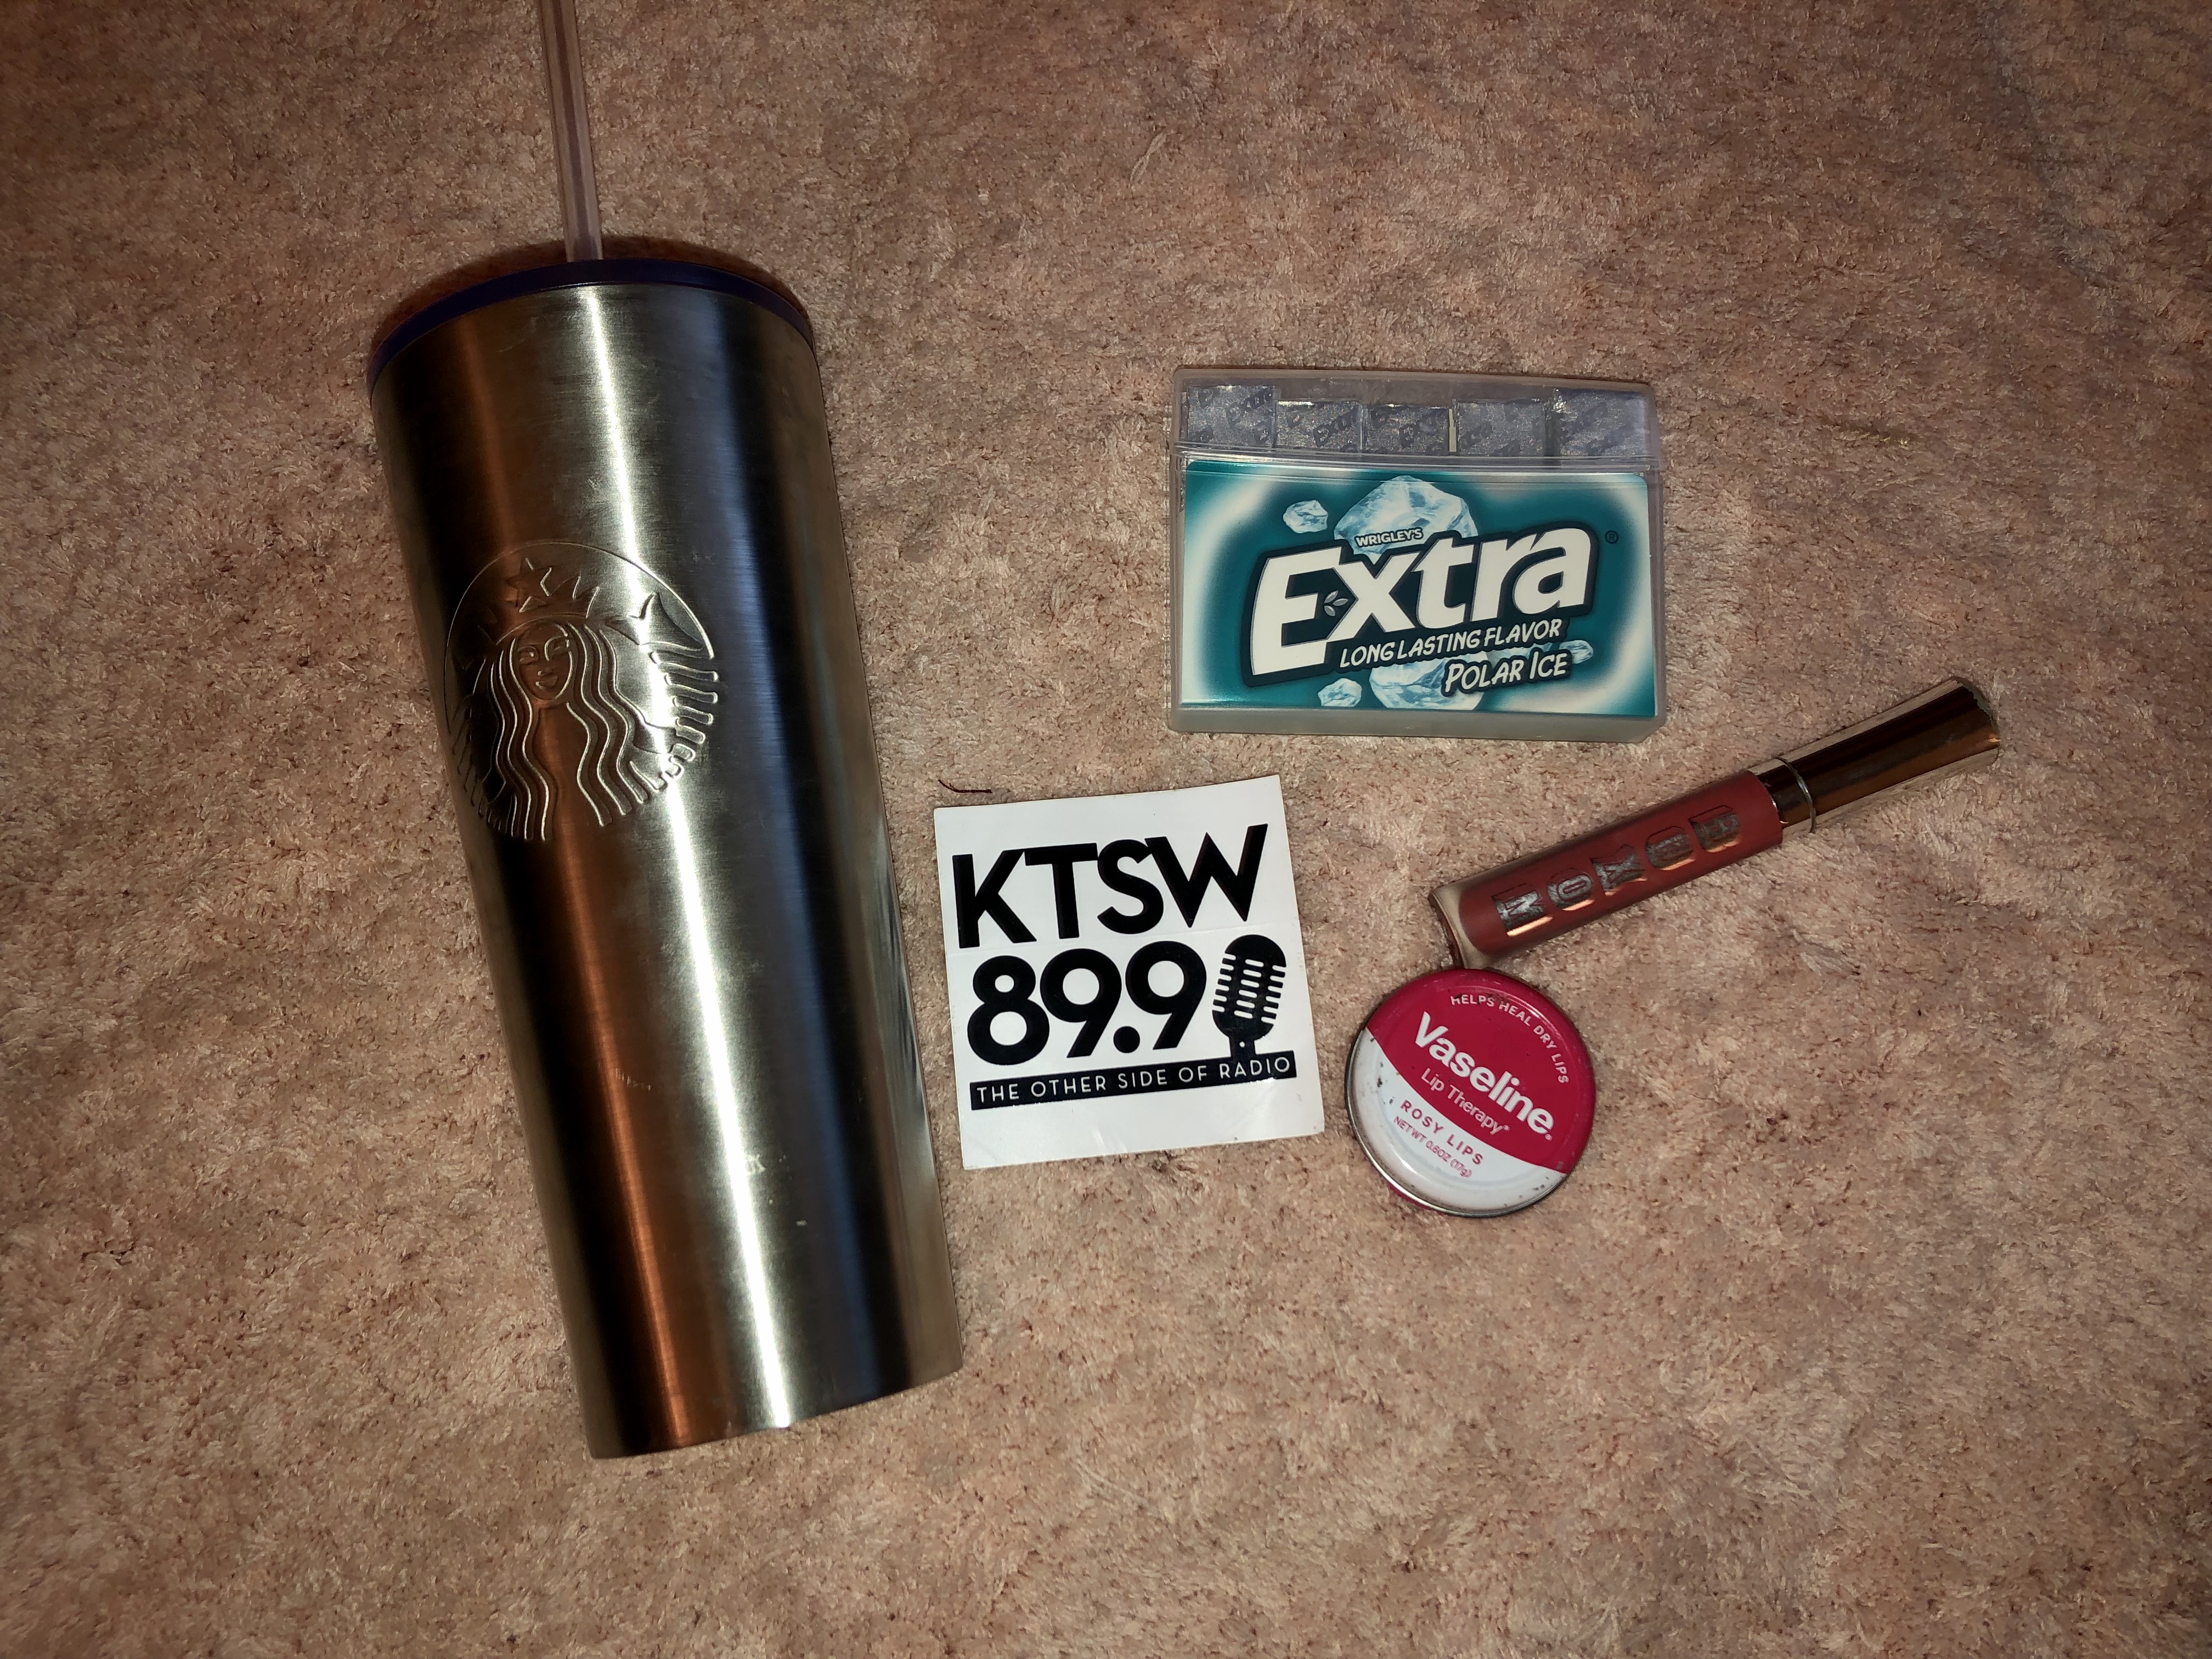 A silver Starbucks cup next to a white KTSW sticker, blue gum package, red lipgloss and pink chapstick